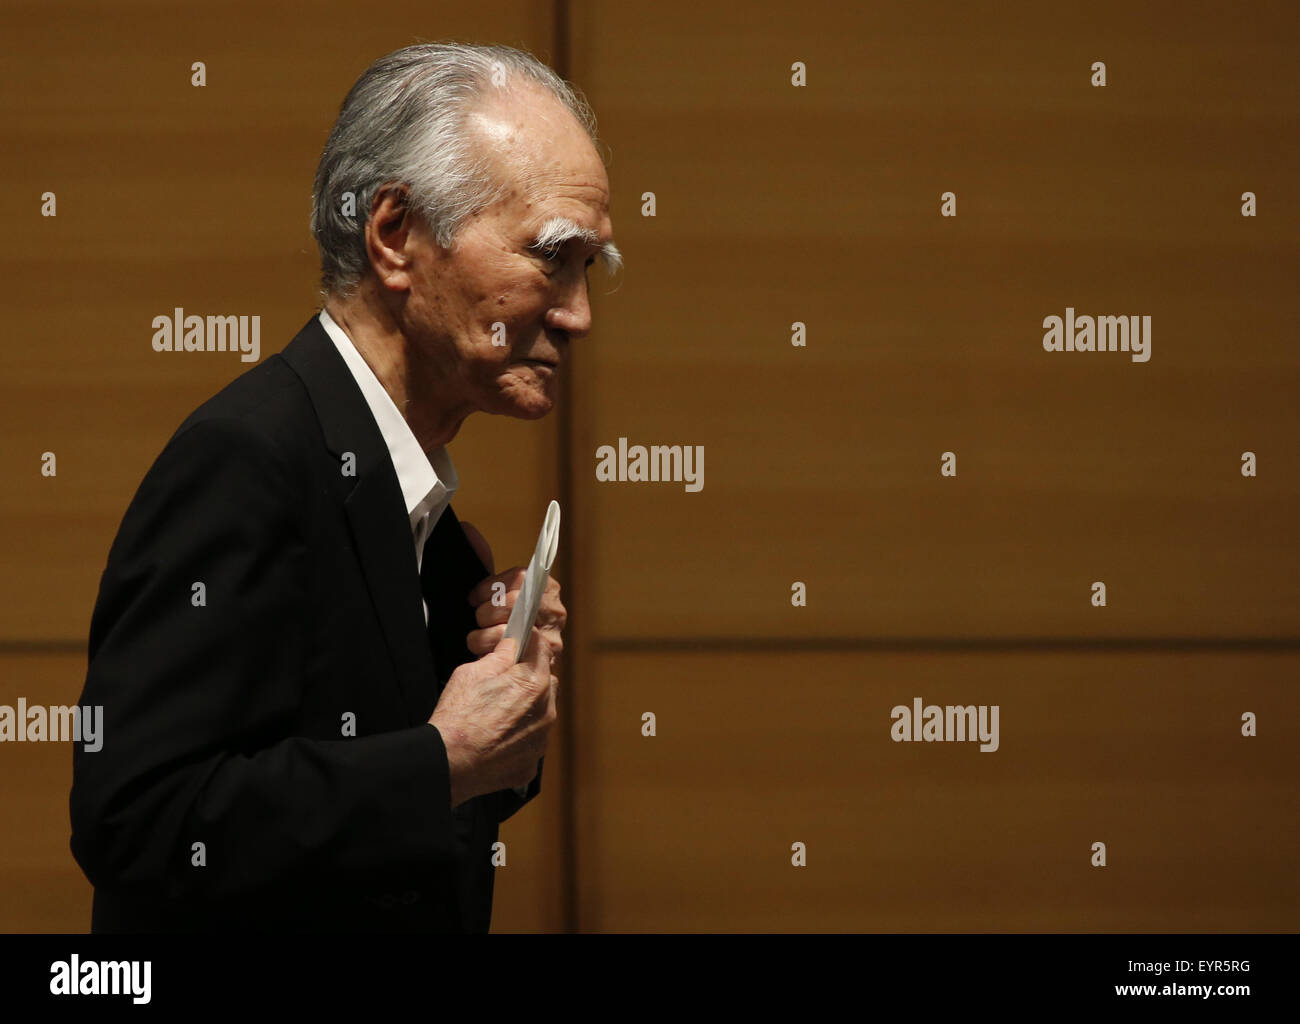 Tokyo, Japan. 3rd Aug, 2015. Tomiichi Murayama, former Japanese Prime Minister, prepare to speak during a forum titled 'Murayama statement and 70 years after the World War II' in Tokyo, capital of Japan, on Aug. 3, 2015. Murayama is famous for his 1995 landmark statement offering an apology to victims of Japan's wartime atrocities. Credit:  Stringer/Xinhua/Alamy Live News Stock Photo